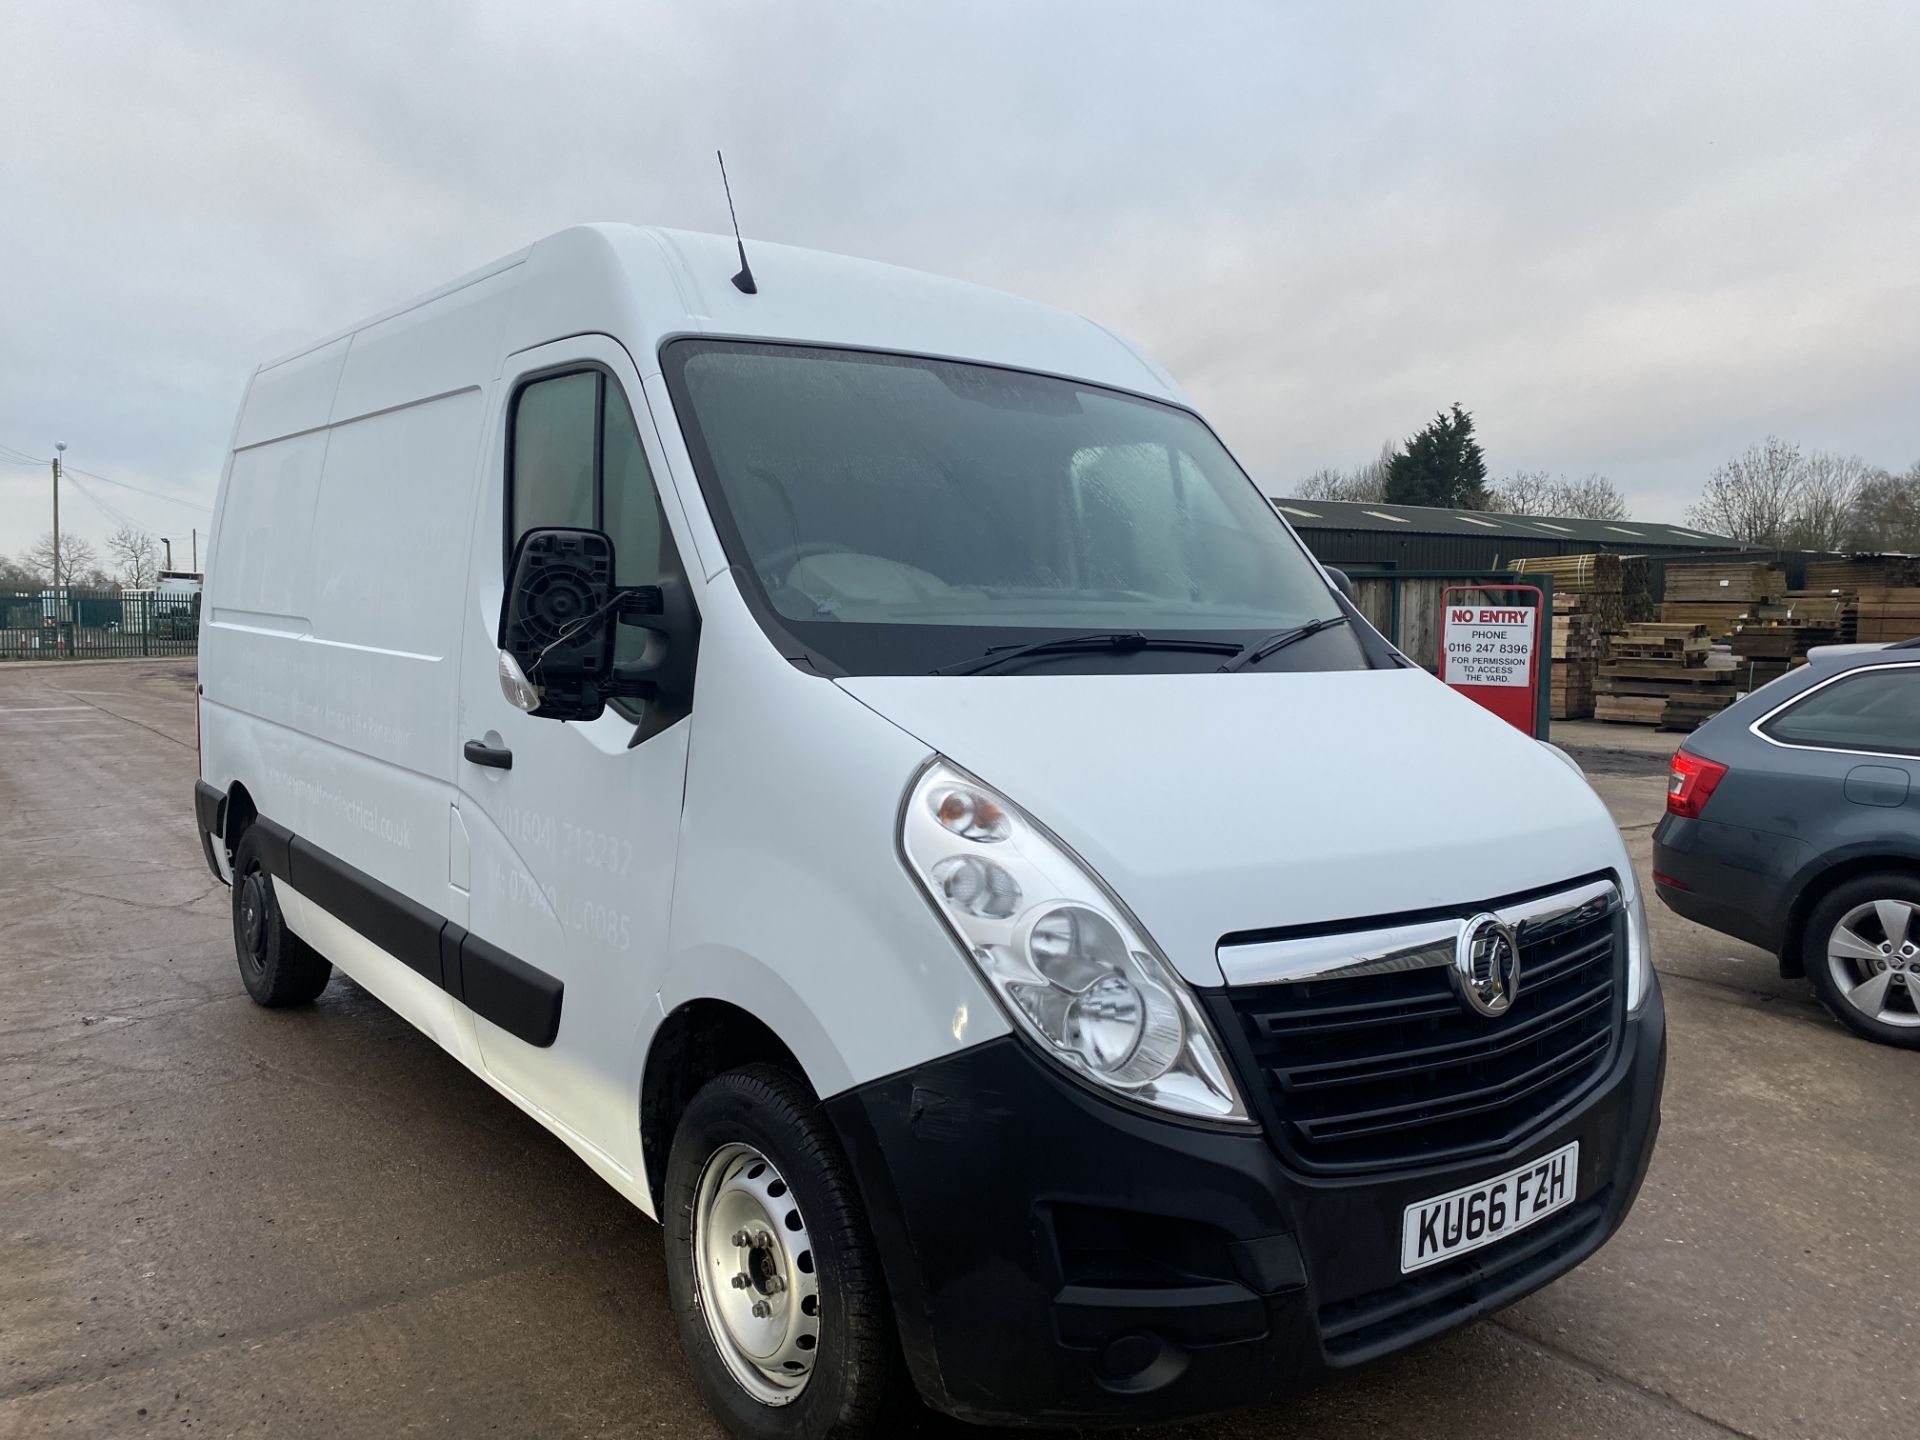 (ON SALE) RENAULT MASTER / VAUXHALL MOVANO 2.3CDTI (130) EURO 6 - 66 REG - ONLY 99K MILES - AIR CON